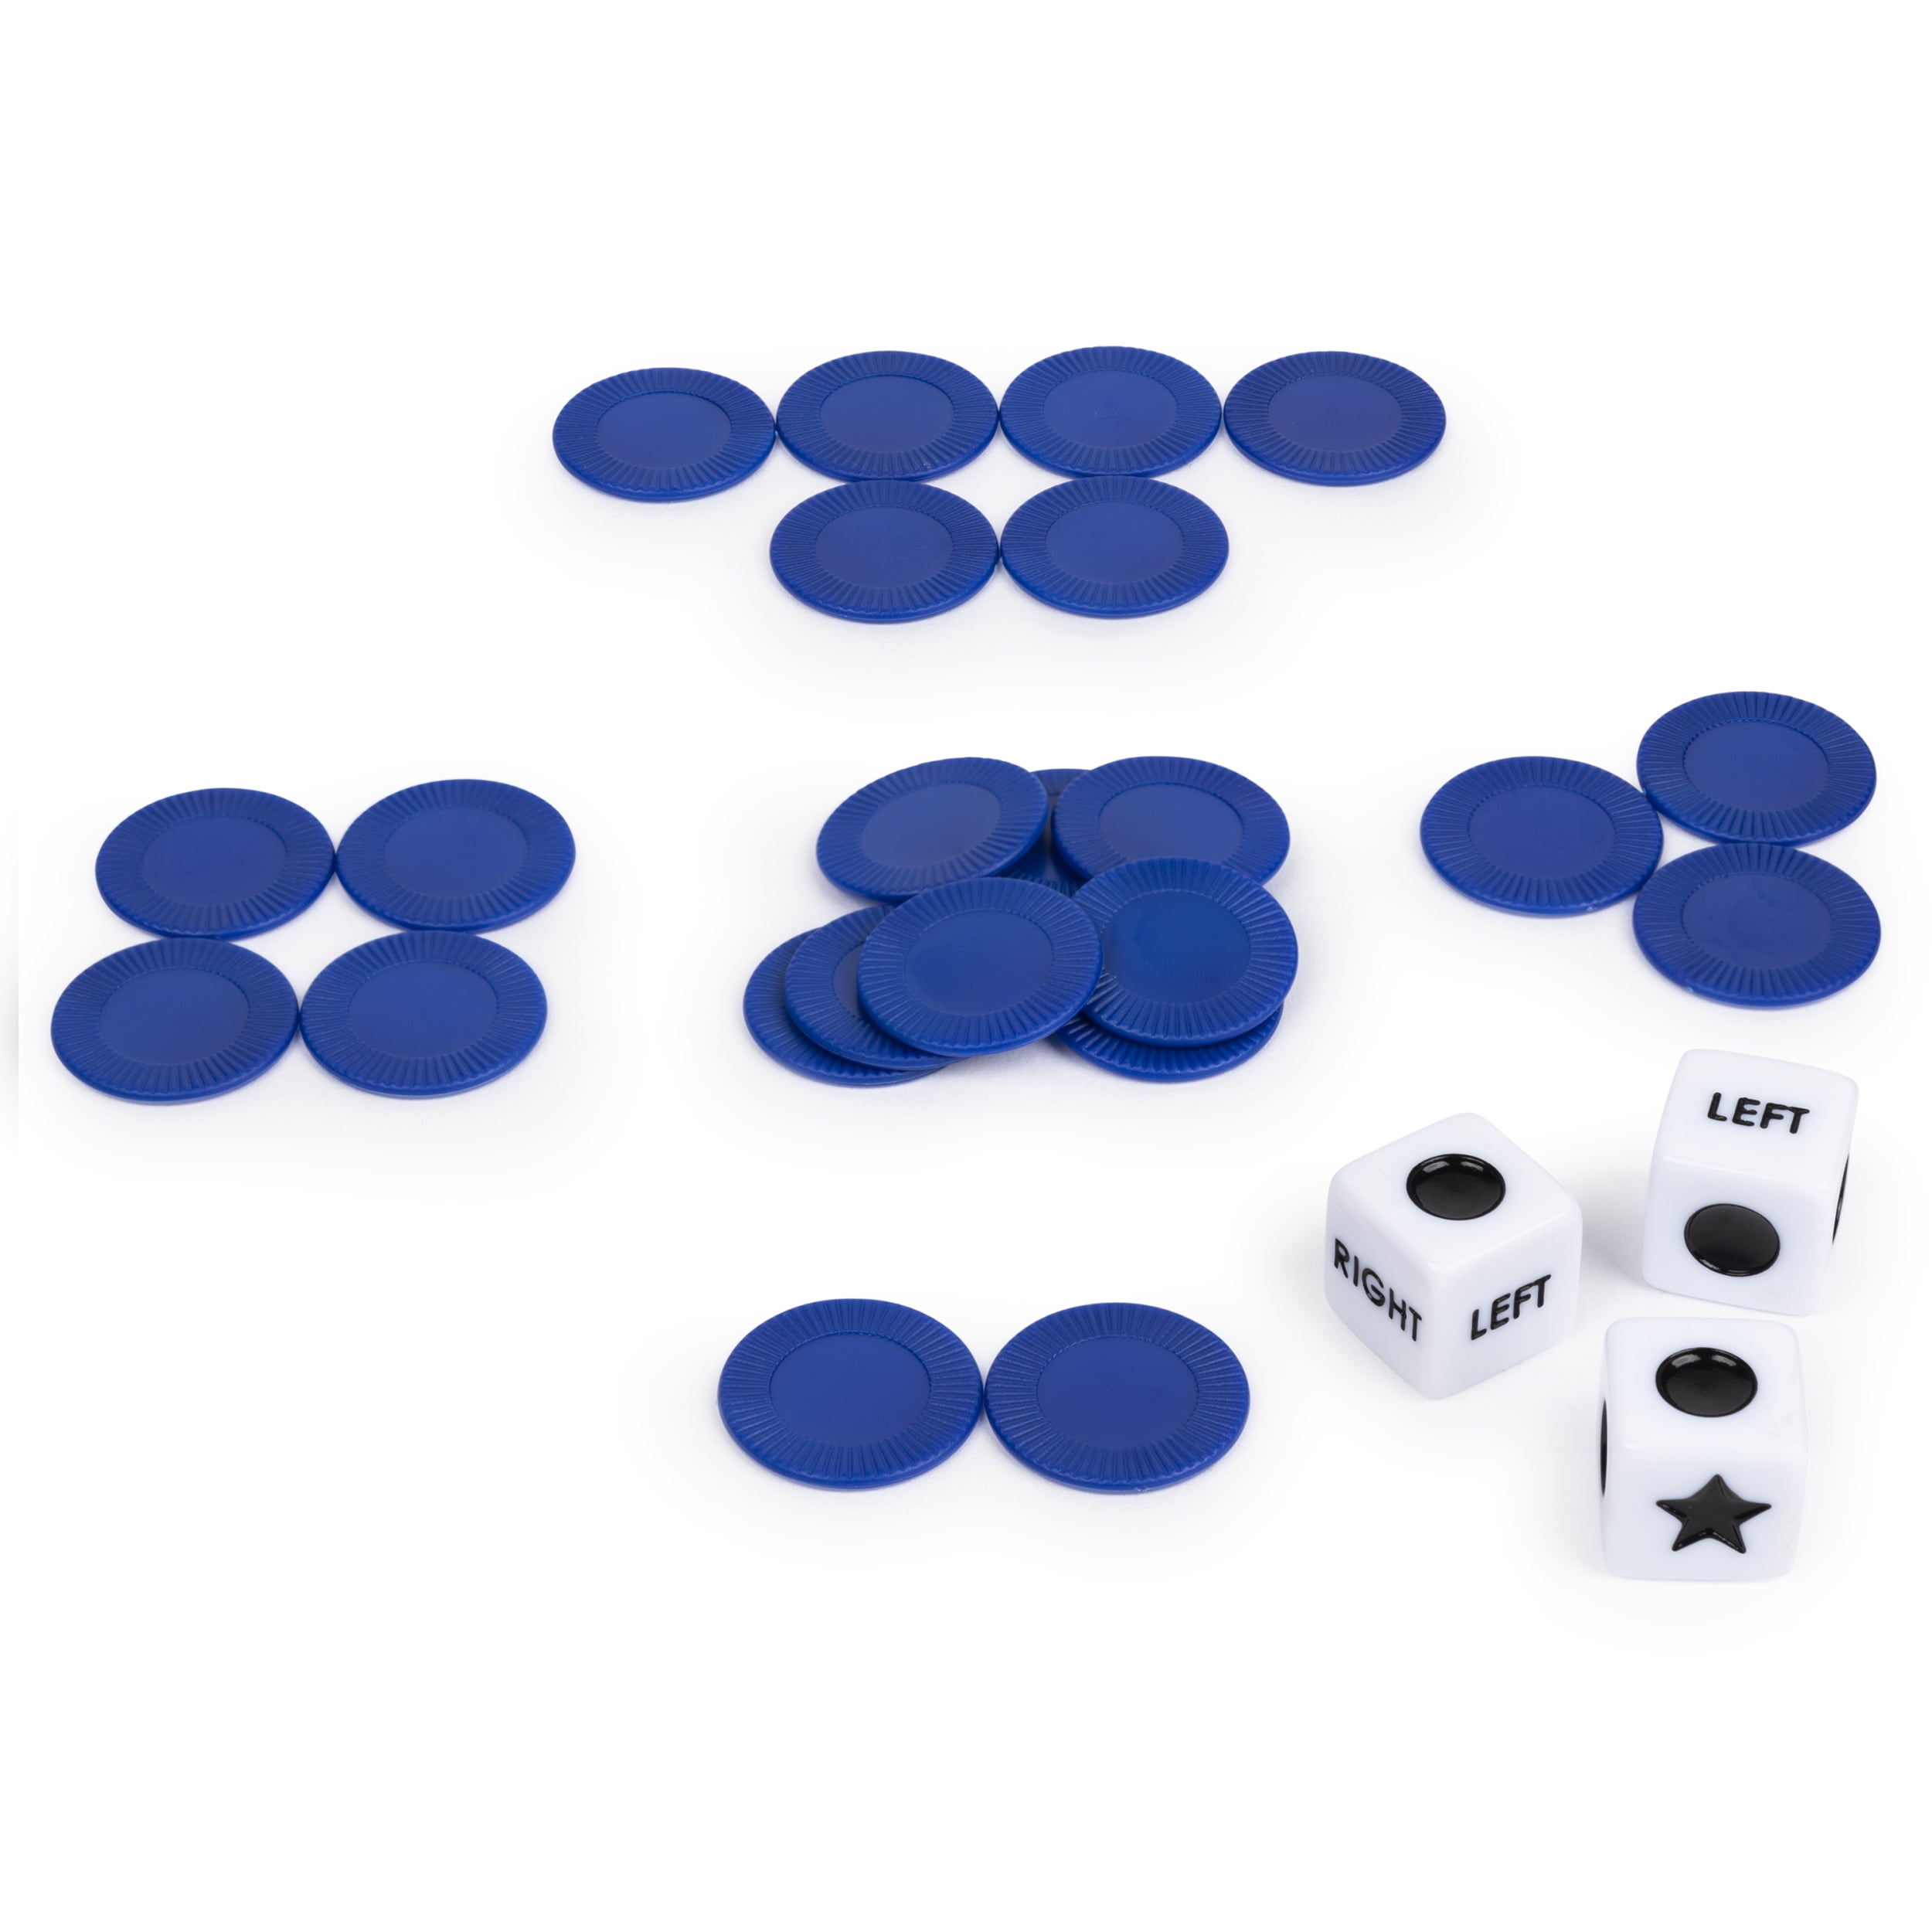 LCR® Left Center RightTM Dice Game Blue Tin-For 3 or more players 